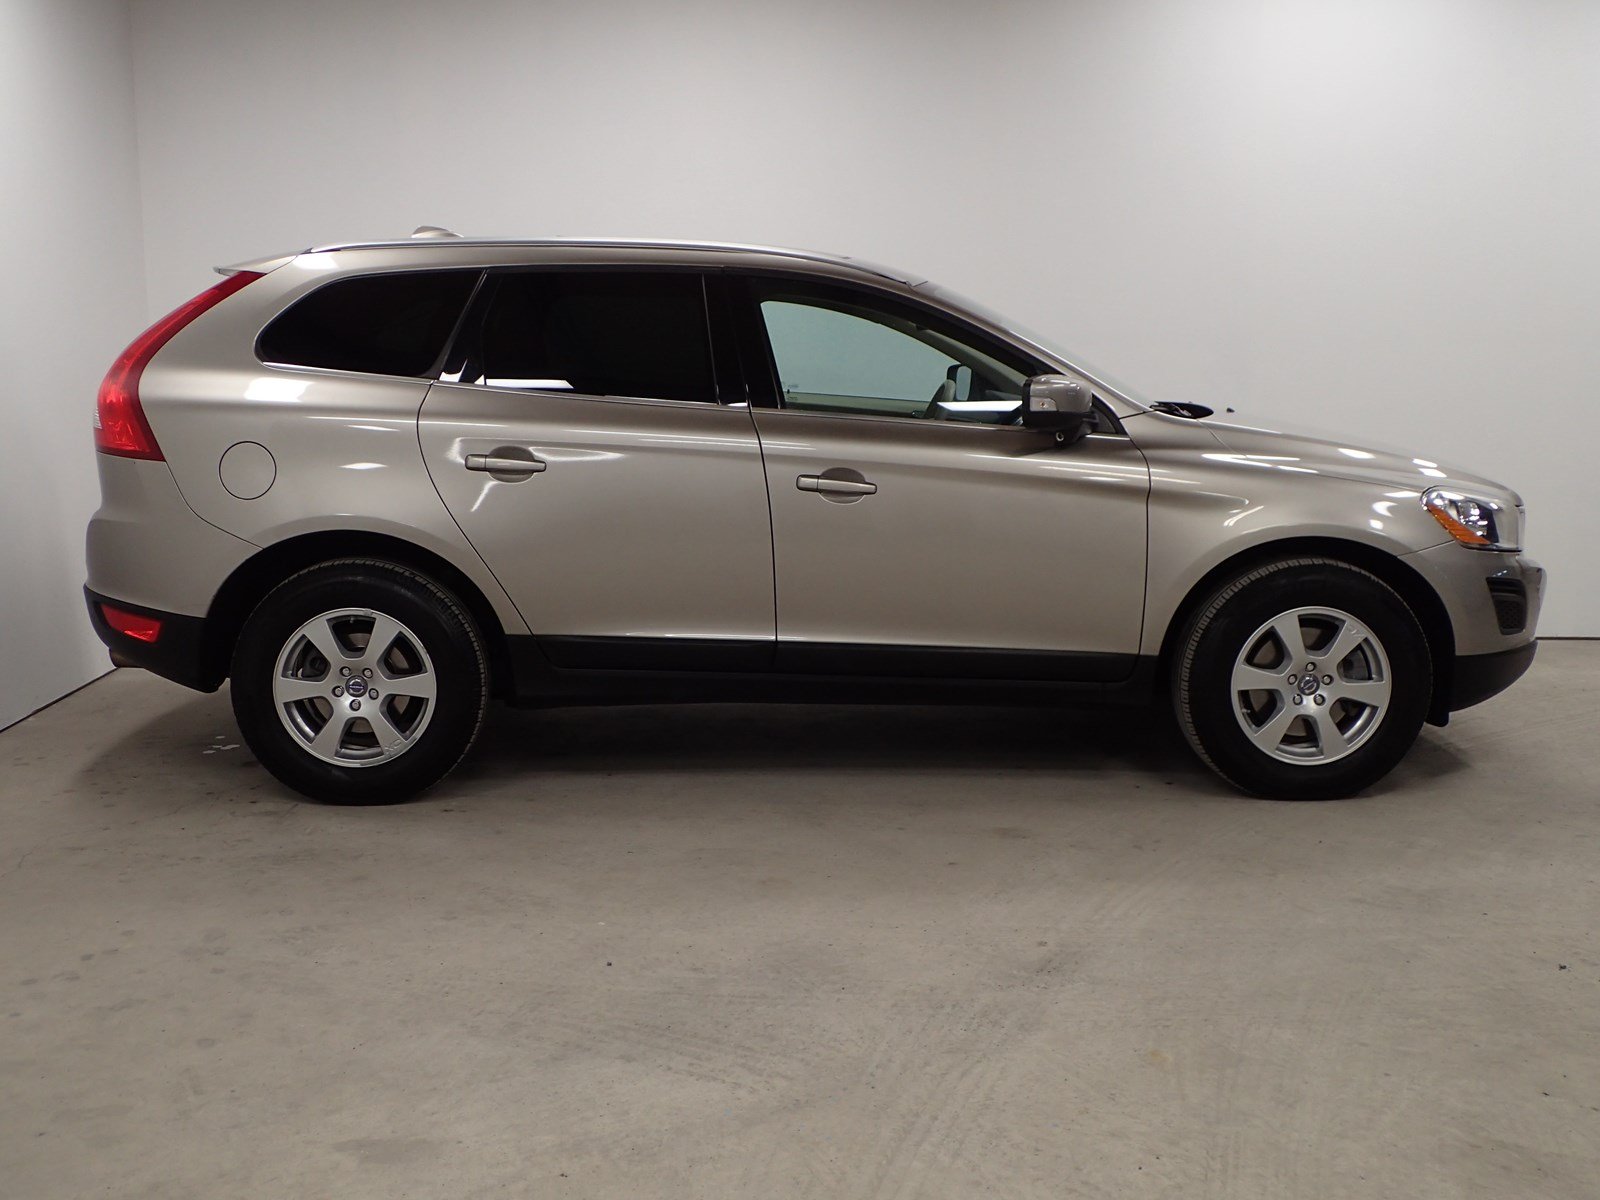 PreOwned 2012 Volvo XC60 3.2 AWD Premier Sport Utility in